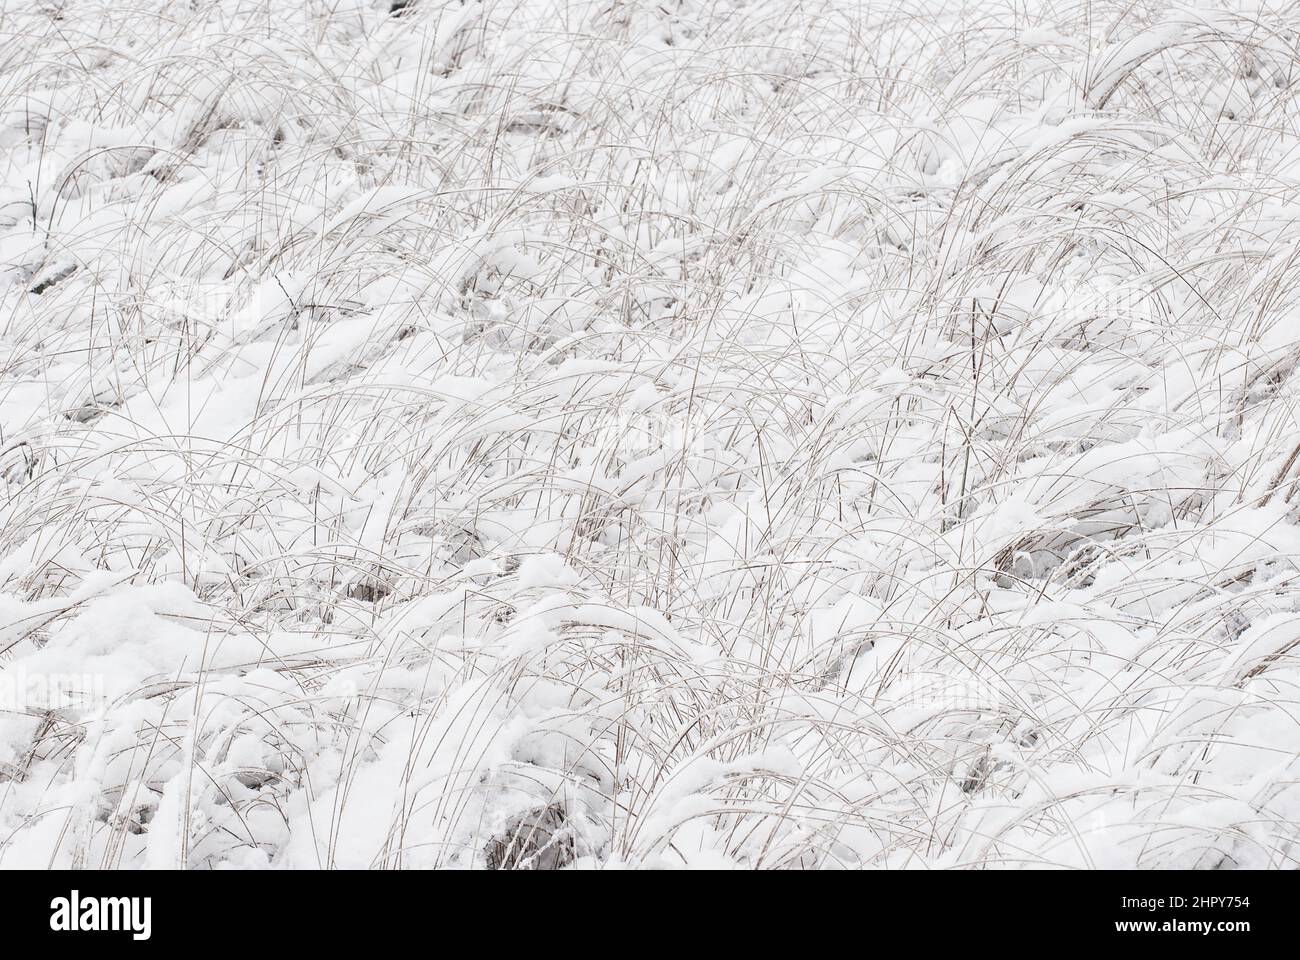 Snow covered grass Stock Photo